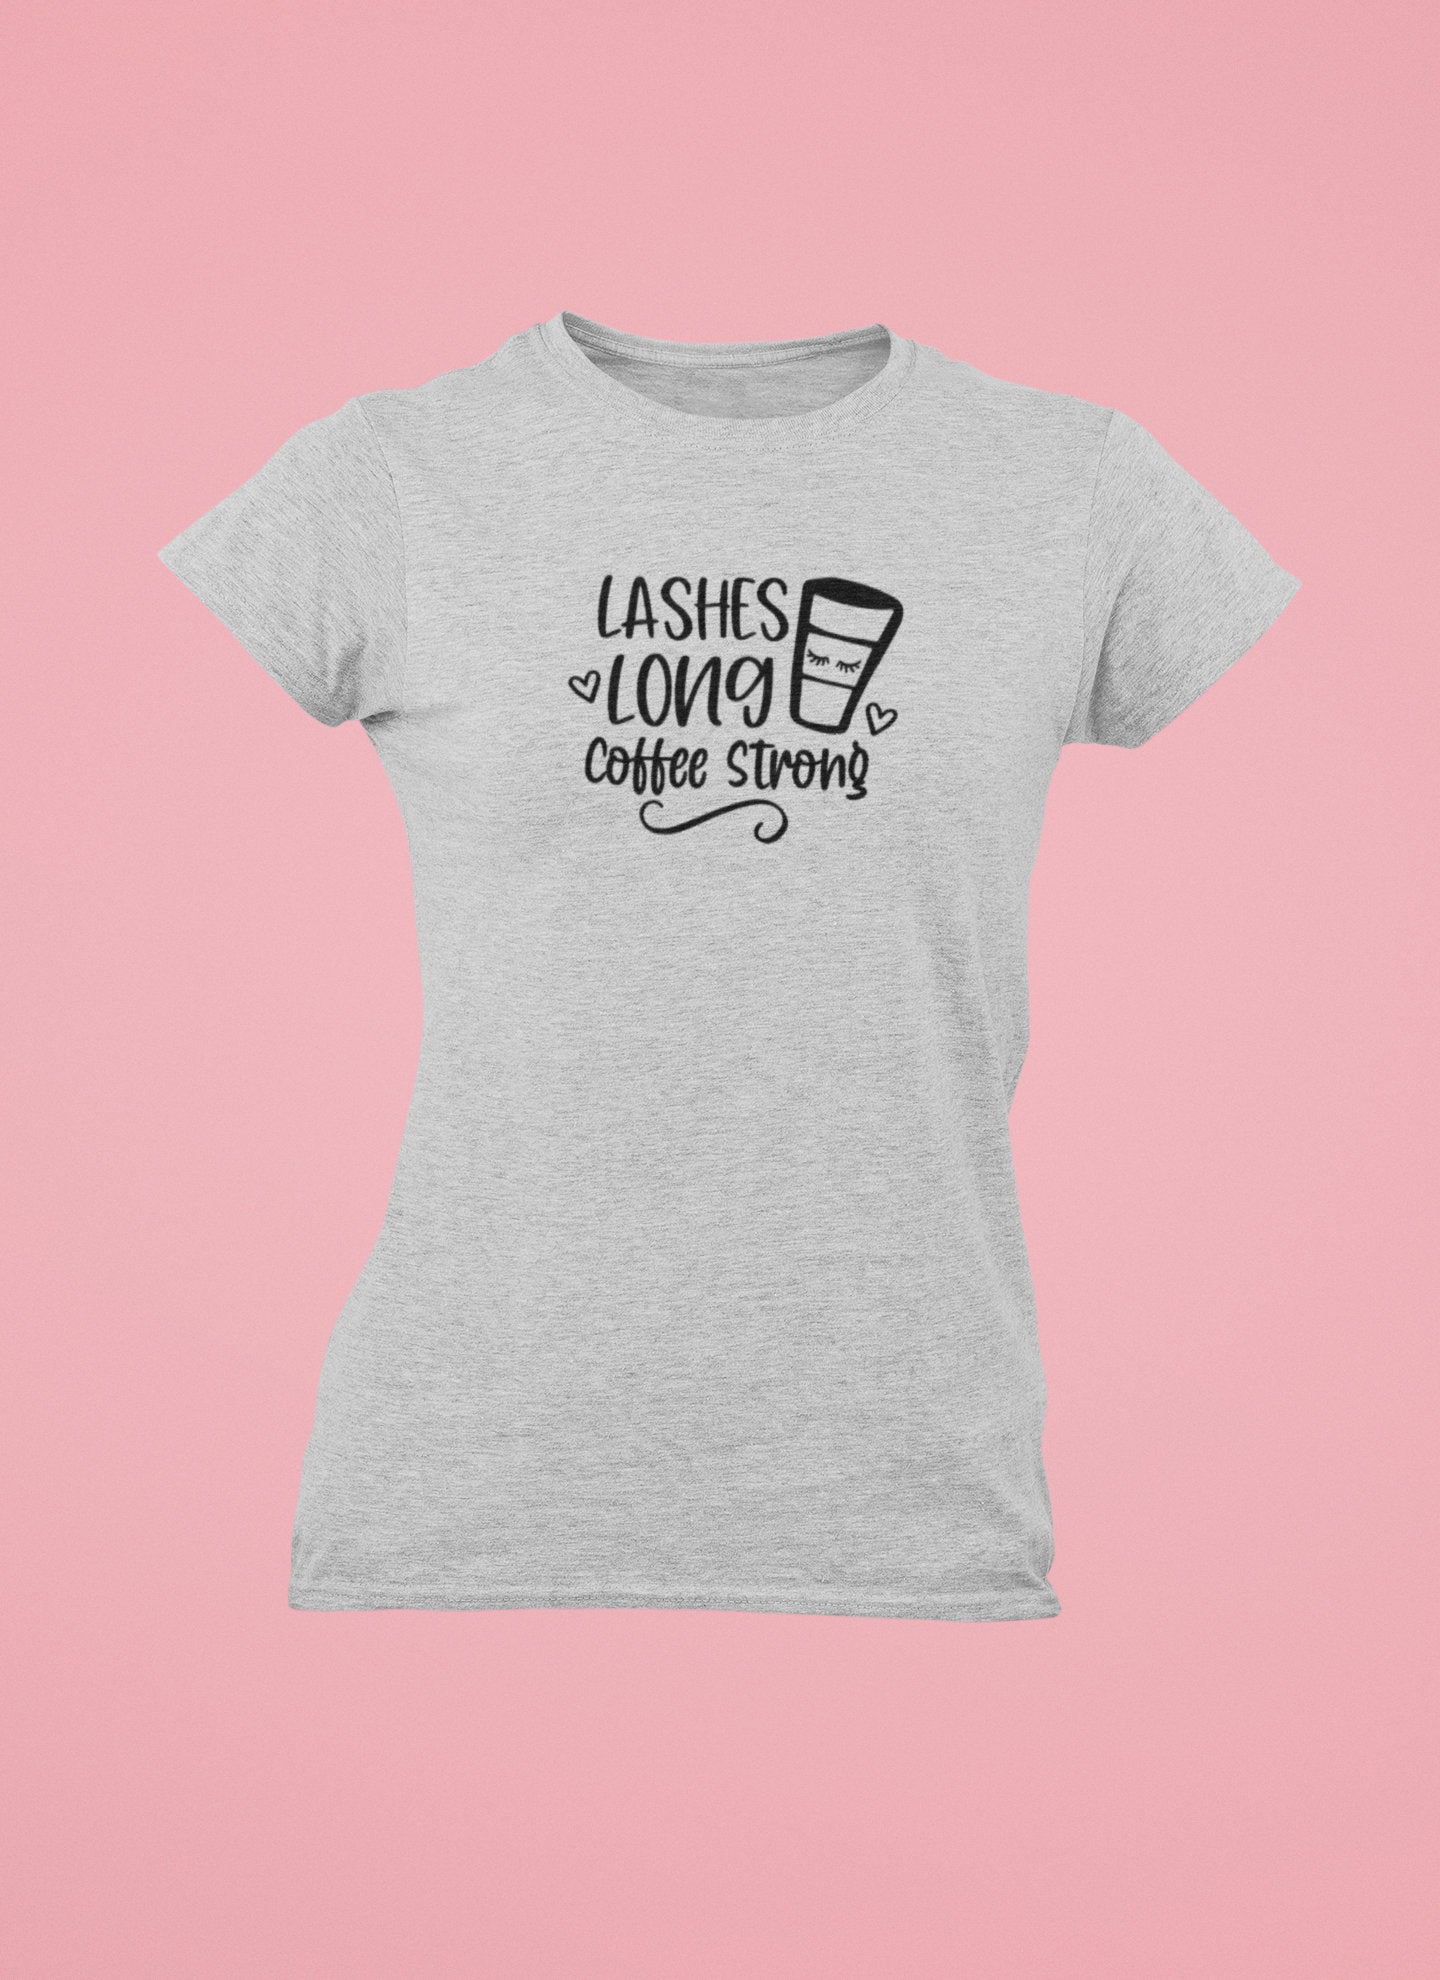 Lashes Long and Coffee Strong Shirt